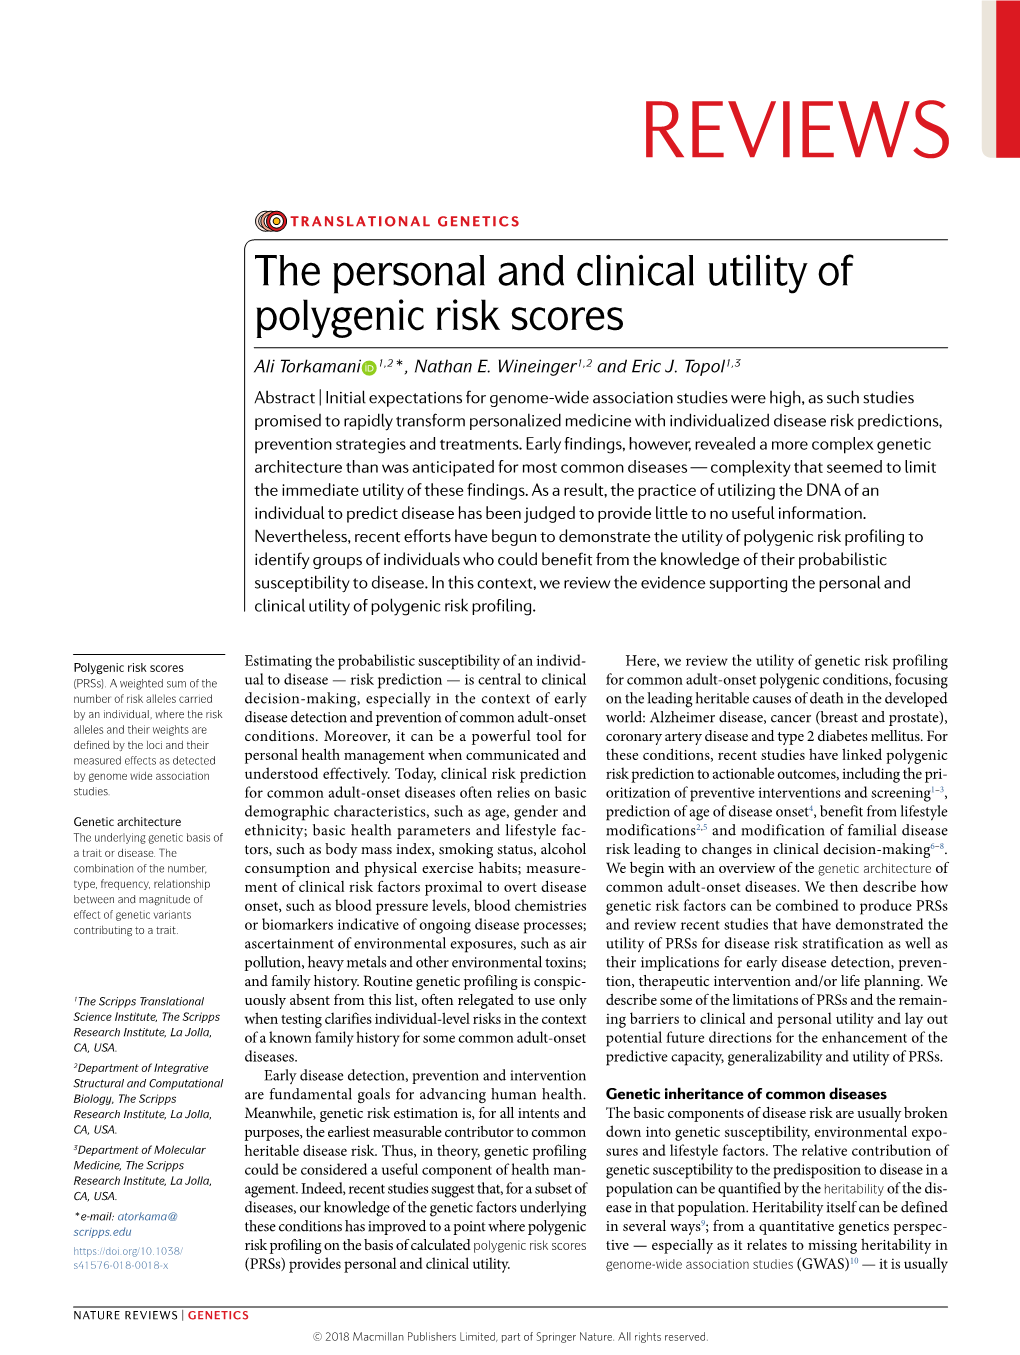 The Personal and Clinical Utility of Polygenic Risk Scores